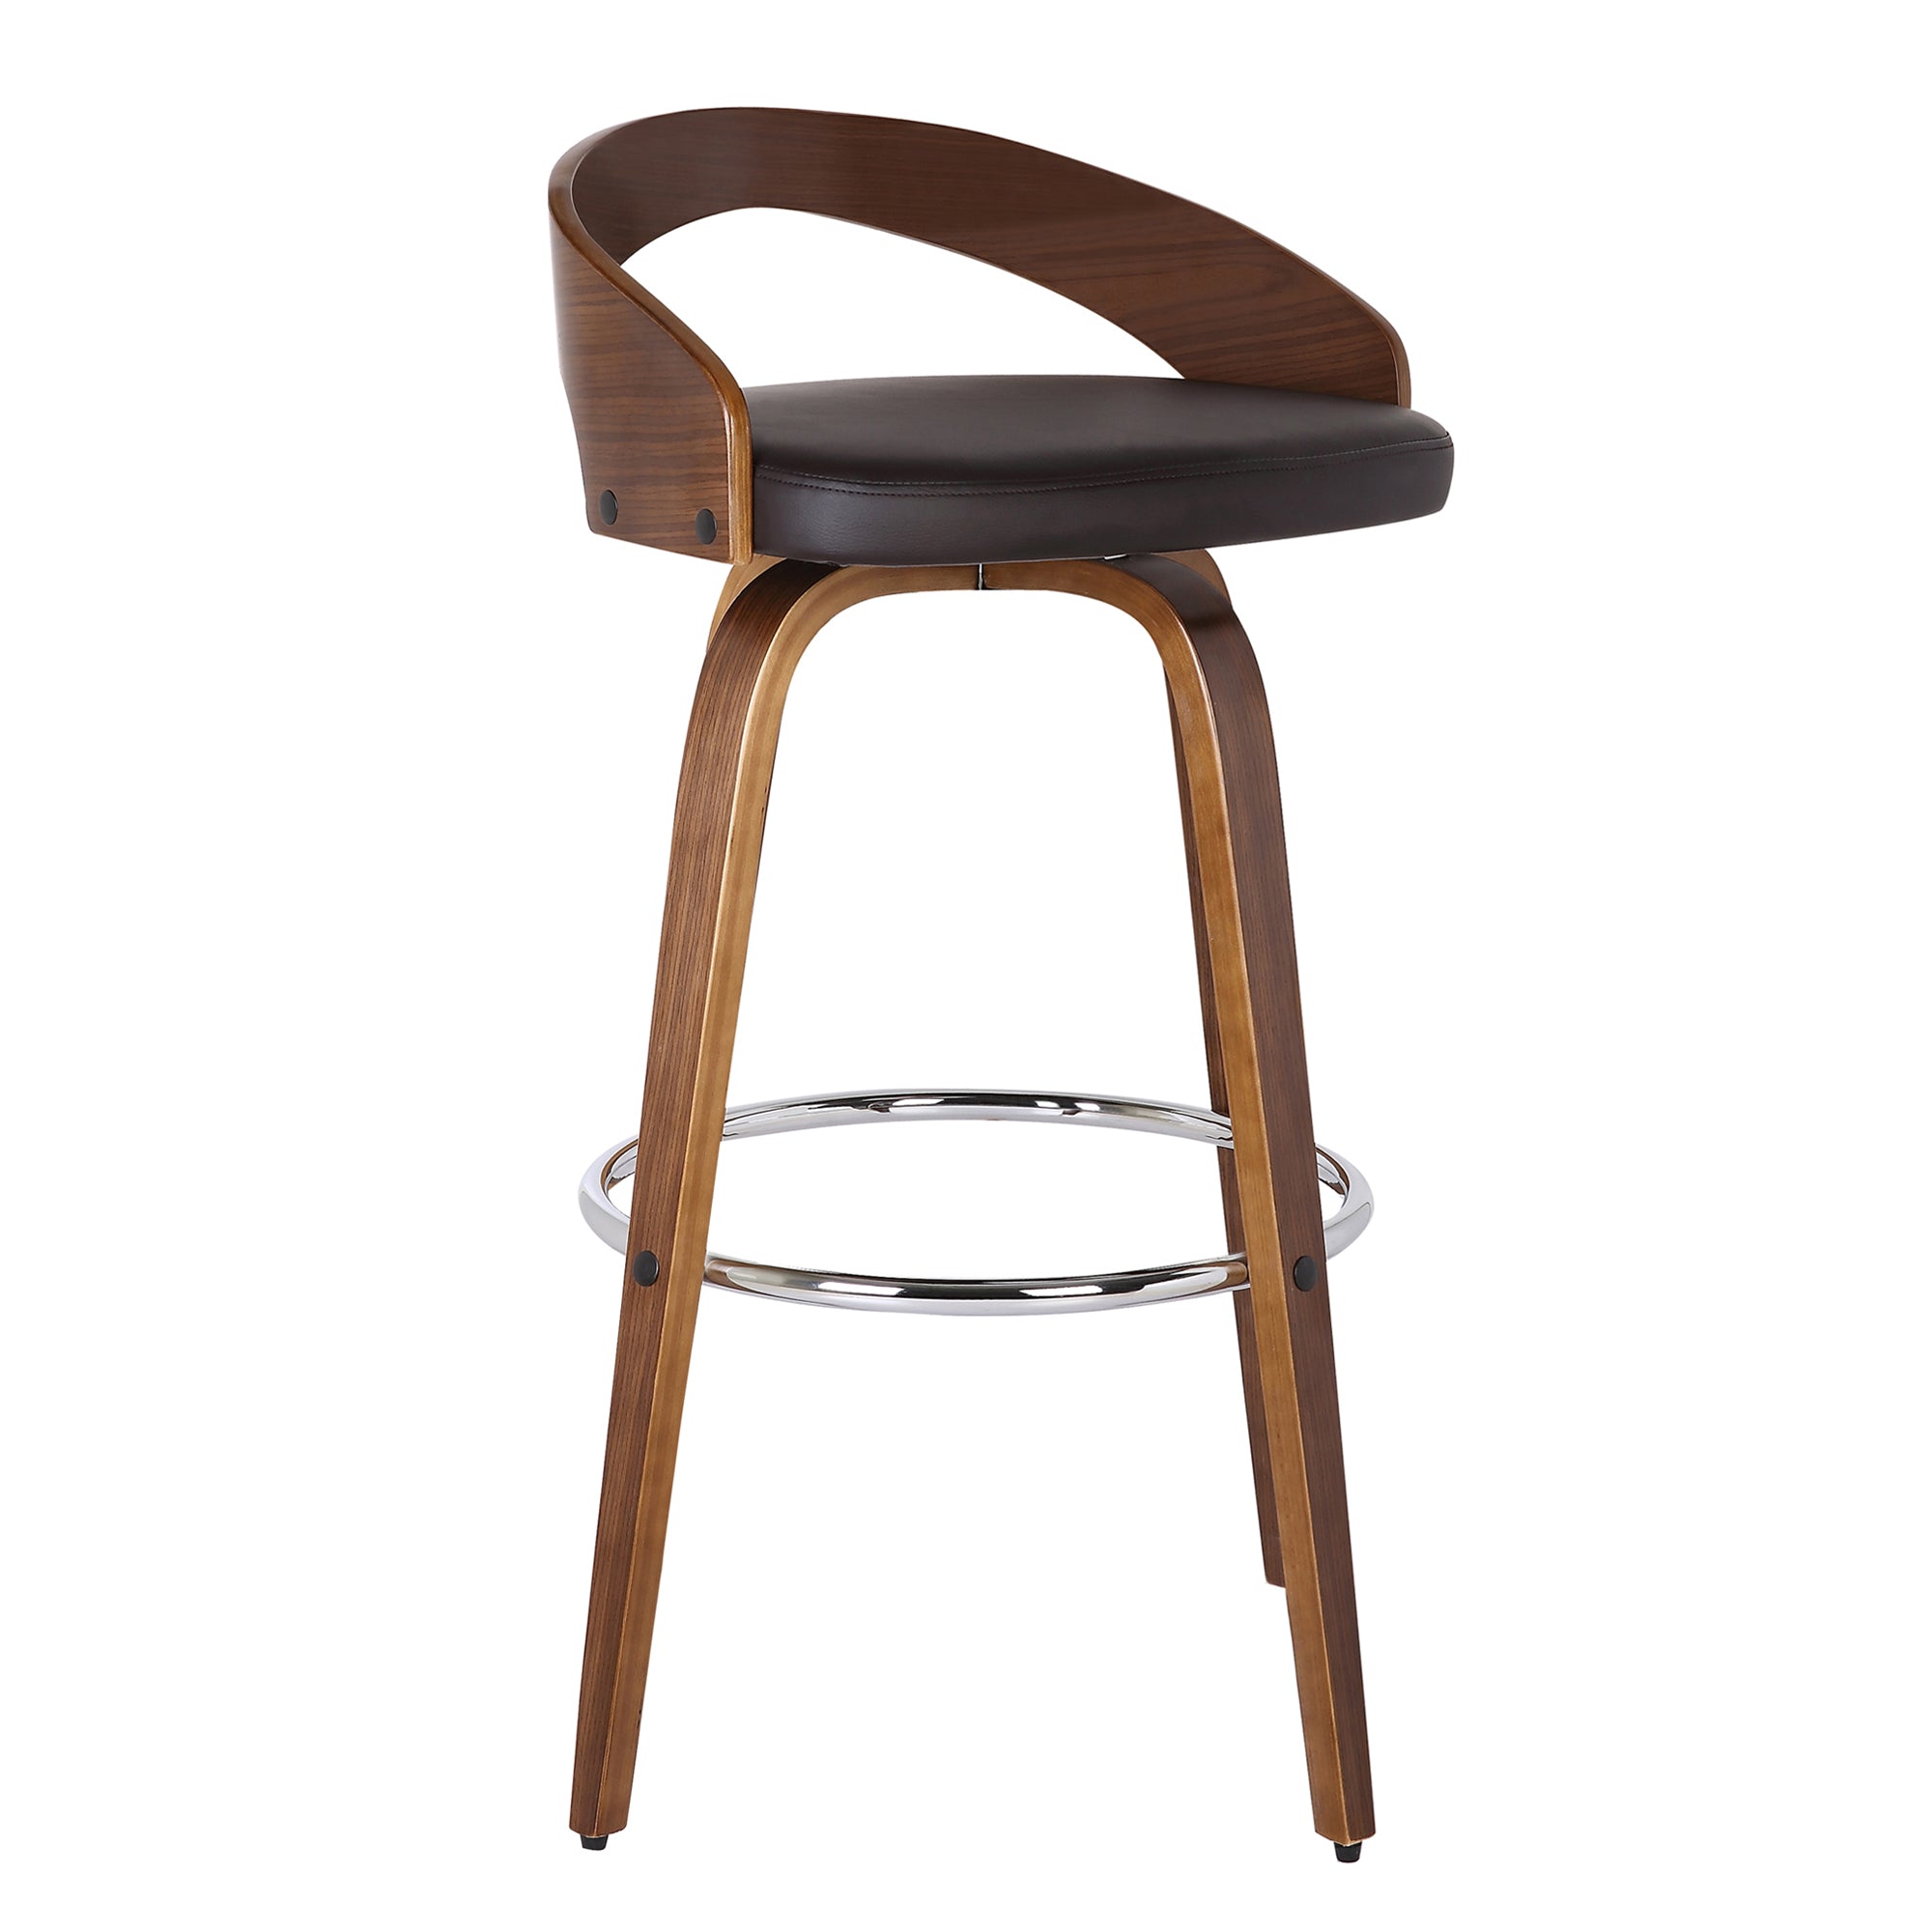 Armen Living Lcsobabrwa26 Sonia 26" Counter Height Barstool In Walnut Wood Finish With Brown Faux Leather